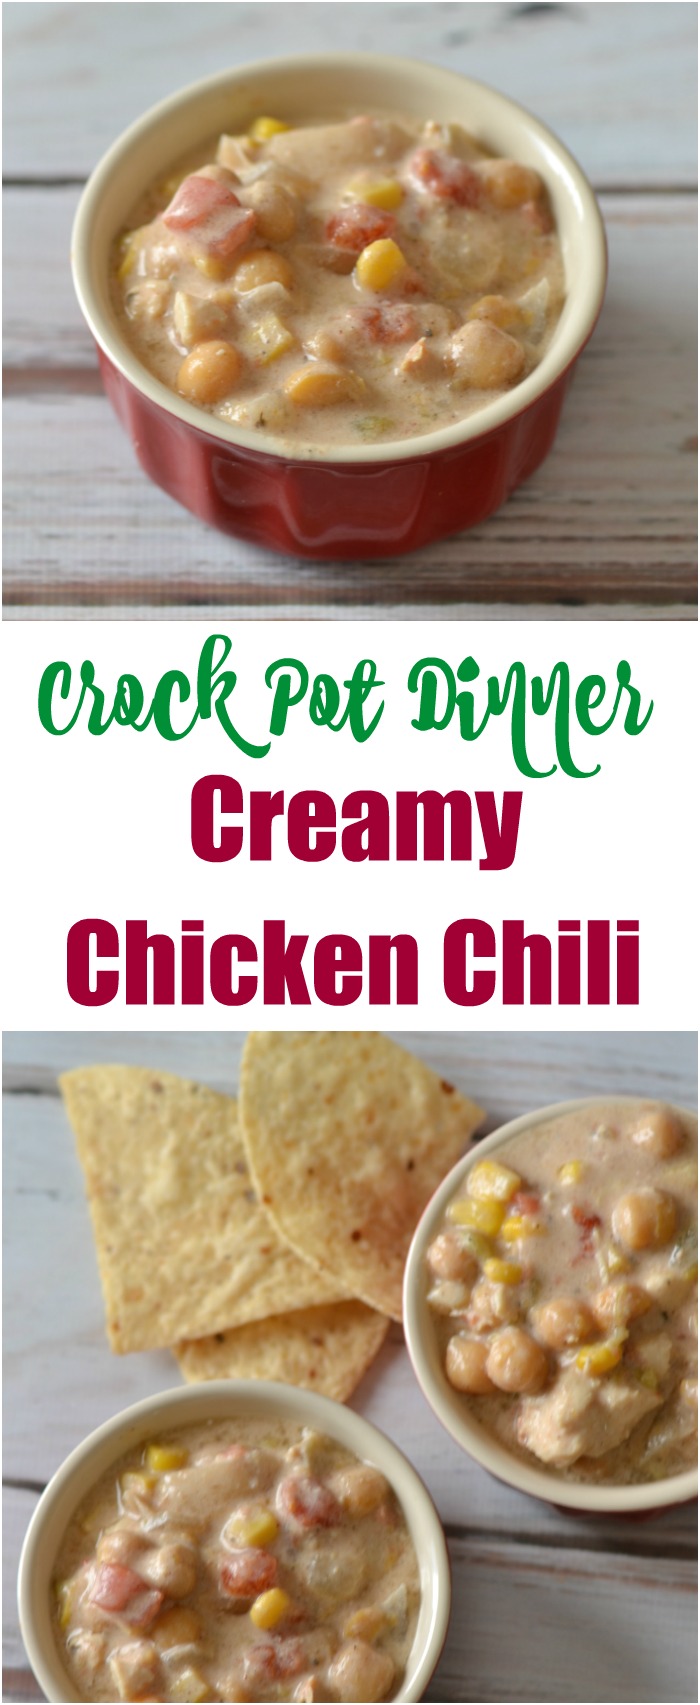 Easy Crock Pot Dinner Creamy Chicken Chili is an easy crockpot meal that will satisfy your whole family. This yummy slow cooker chicken dump recipe.